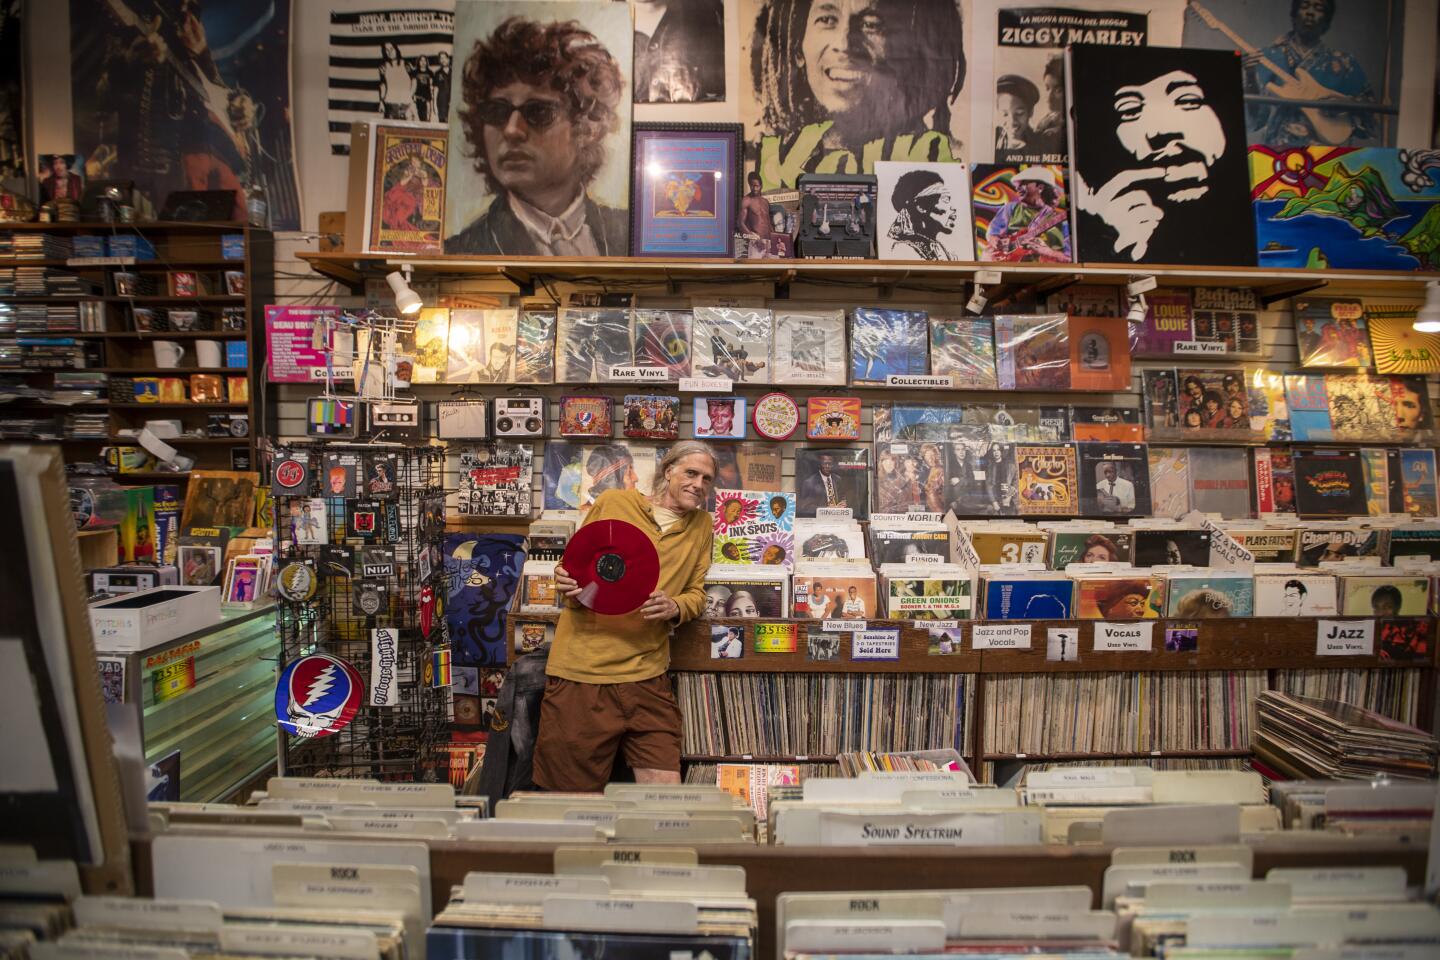 Walking through Sound Spectrum's doors can make you feel like you've stepped back into the 1960s and '70s.